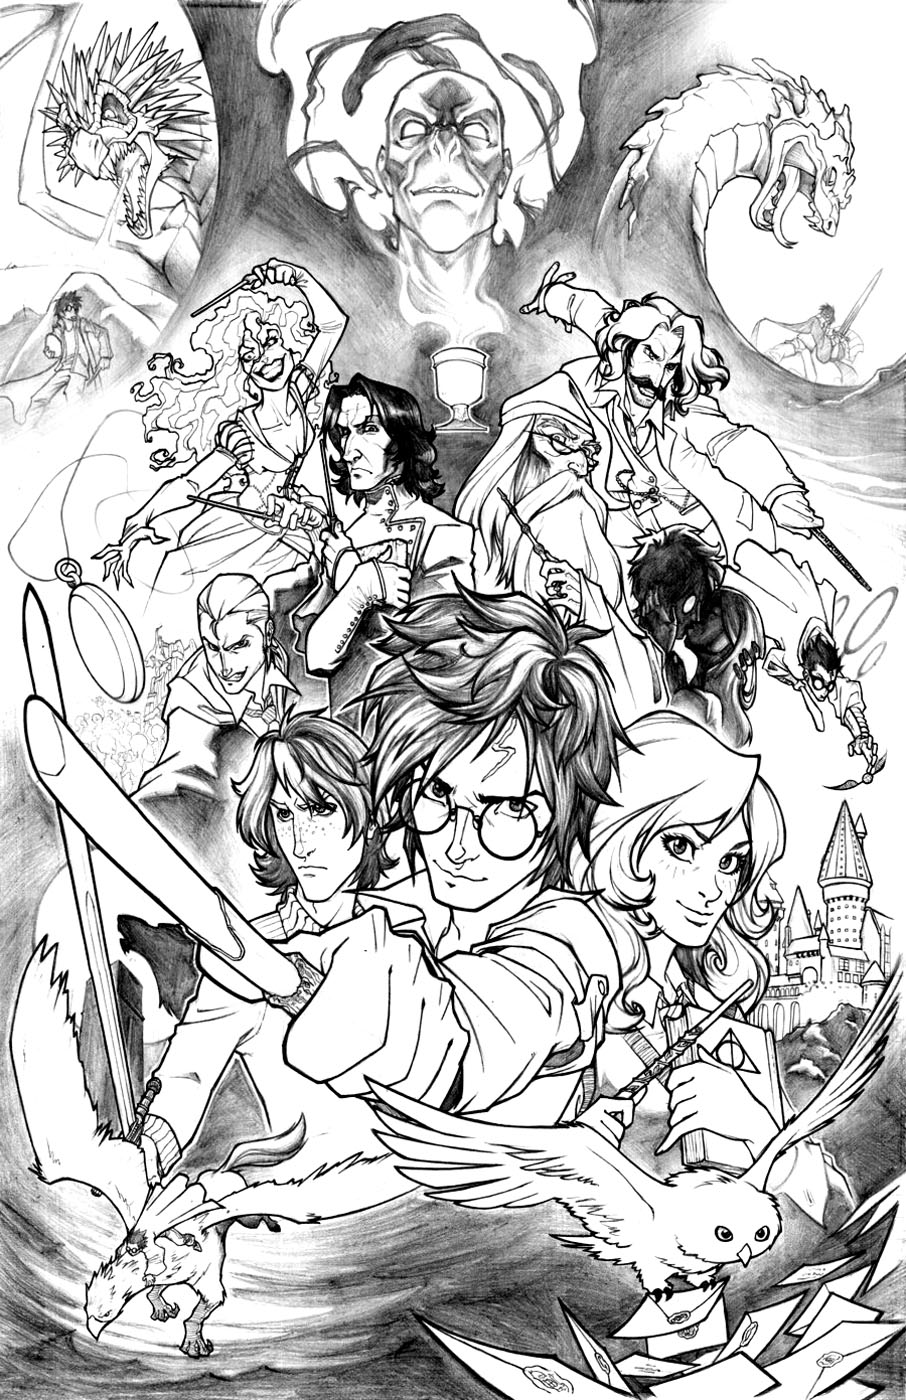 Coloring page representing Harry Potter and his friends Hermione and Ron against his ennemies Voldemort, Lestrange and others ...